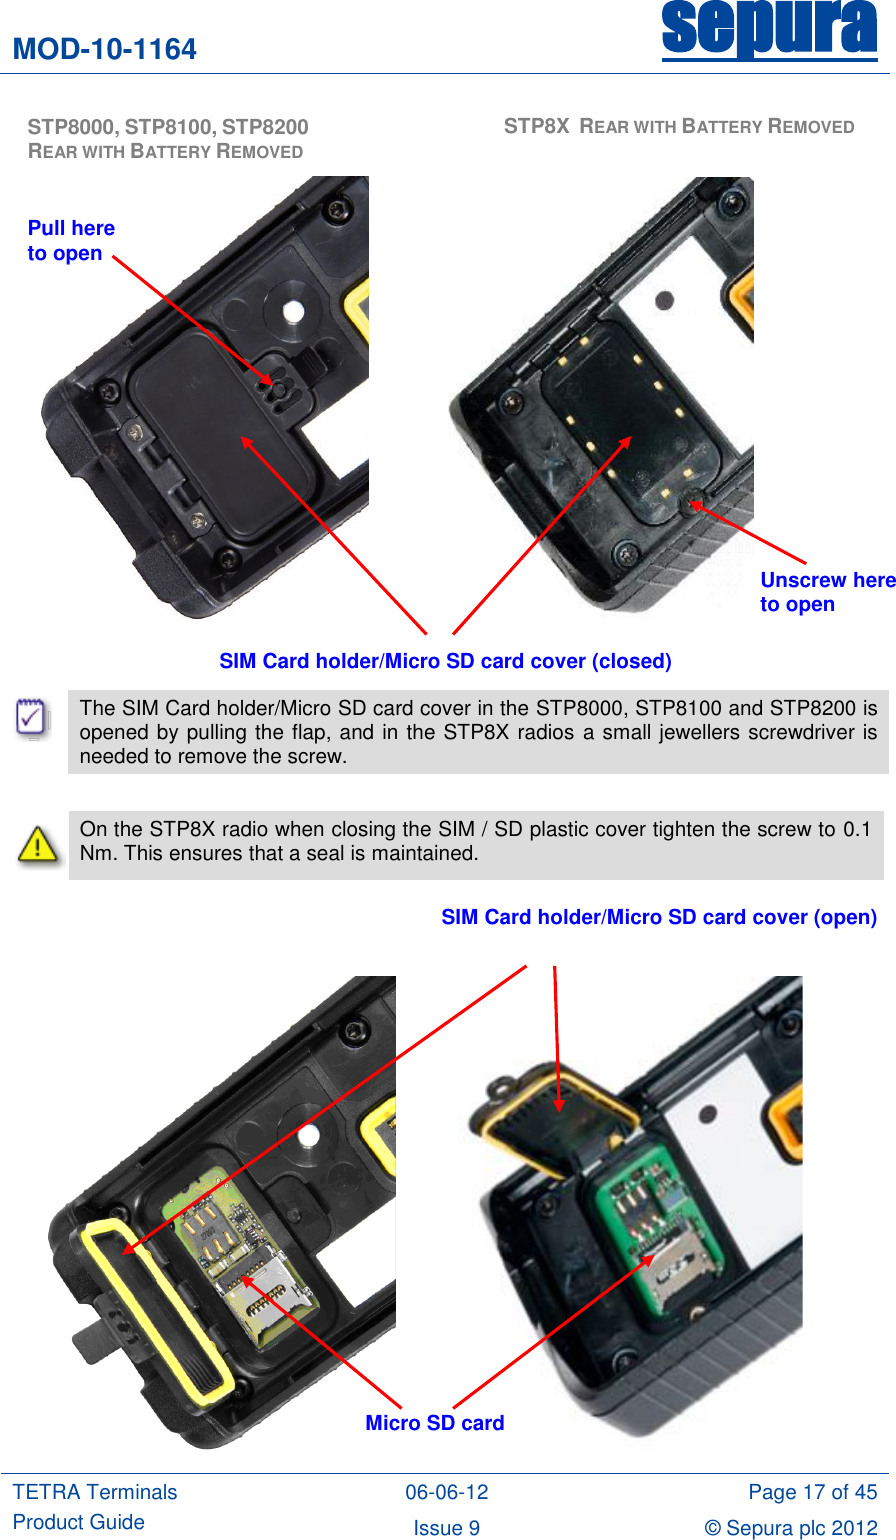 MOD-10-1164 sepura  TETRA Terminals Product Guide 06-06-12 Page 17 of 45 Issue 9 © Sepura plc 2012                                    The SIM Card holder/Micro SD card cover in the STP8000, STP8100 and STP8200 is opened by pulling the flap, and in the STP8X radios a small jewellers screwdriver is needed to remove the screw.   On the STP8X radio when closing the SIM / SD plastic cover tighten the screw to 0.1 Nm. This ensures that a seal is maintained.                SIM Card holder/Micro SD card cover (closed) SIM Card holder/Micro SD card cover (open) Micro SD card  STP8000, STP8100, STP8200 REAR WITH BATTERY REMOVED  STP8X  REAR WITH BATTERY REMOVED Unscrew here to open Pull here to open 